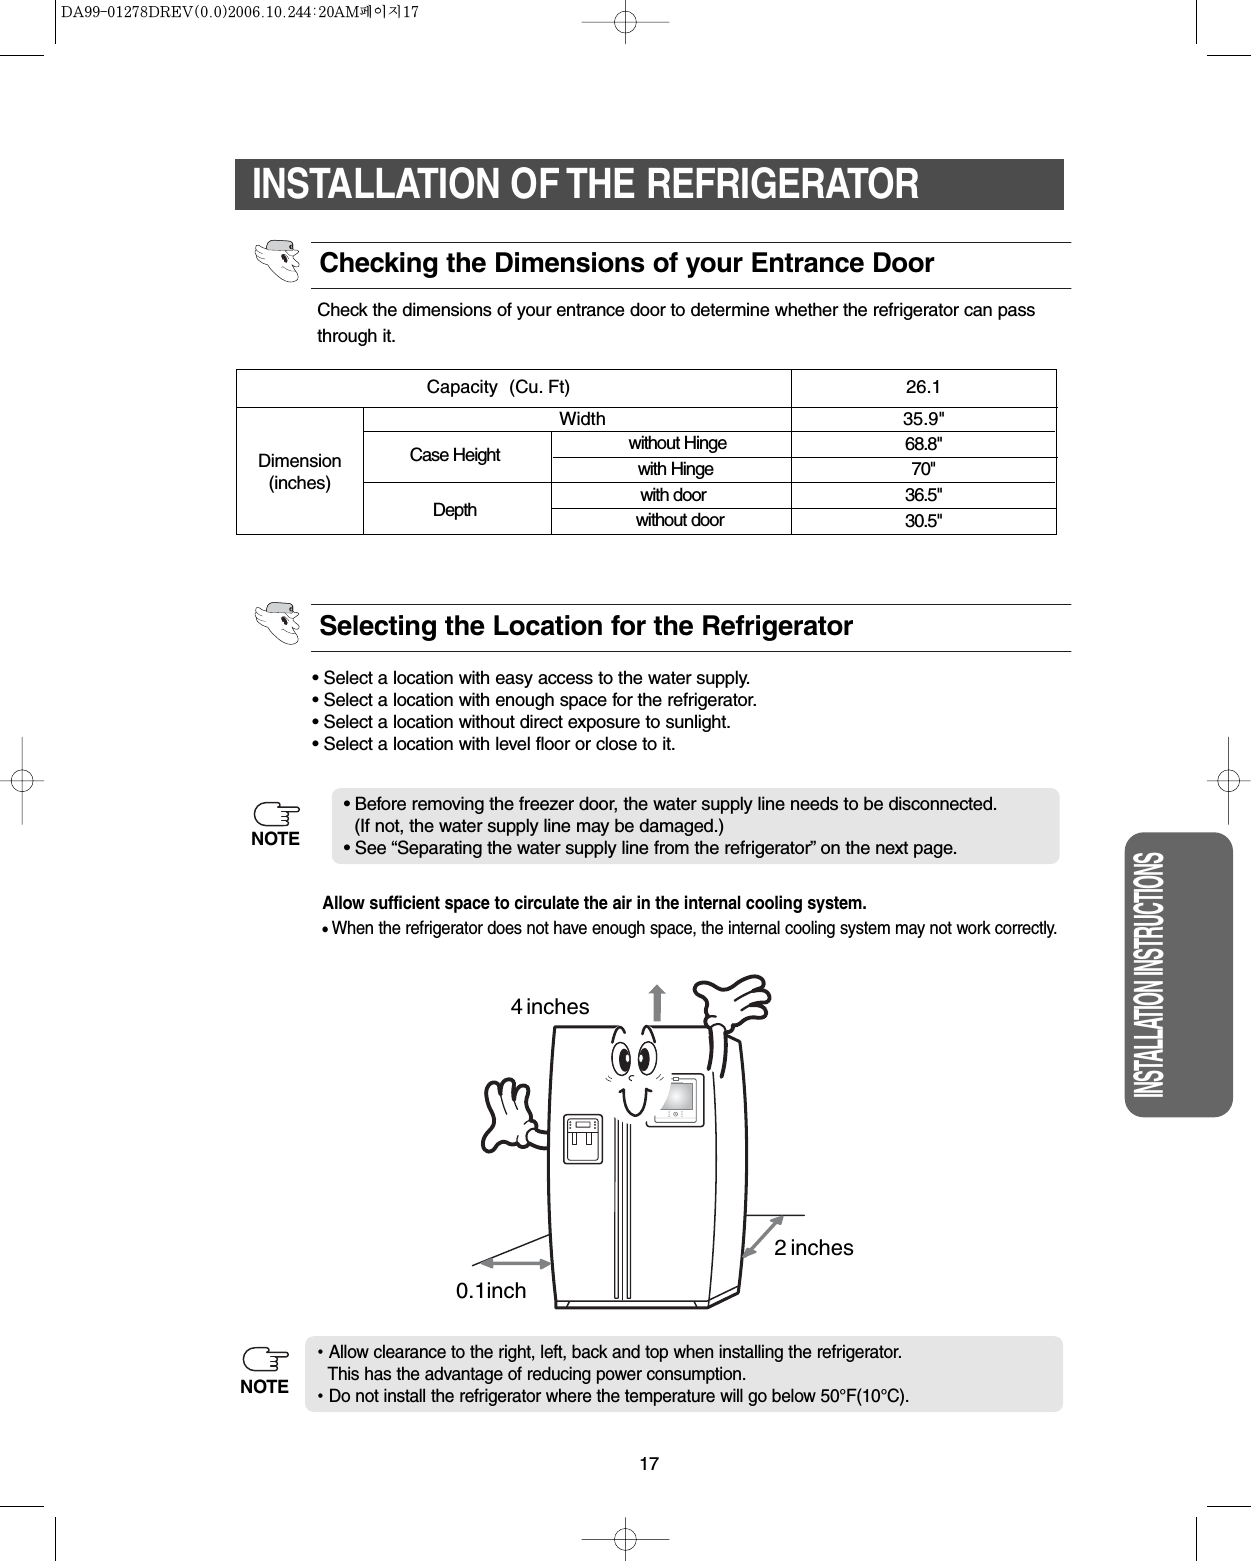 17INSTALLATION INSTRUCTIONSINSTALLATION OF THE REFRIGERATORCheck the dimensions of your entrance door to determine whether the refrigerator can passthrough it.• Select a location with easy access to the water supply.• Select a location with enough space for the refrigerator.• Select a location without direct exposure to sunlight.• Select a location with level floor or close to it.• Before removing the freezer door, the water supply line needs to be disconnected.(If not, the water supply line may be damaged.)• See “Separating the water supply line from the refrigerator” on the next page.Dimension(inches)WidthCapacity  (Cu. Ft) 26.1without HingeCase Height with Hingewith doorDepth without door35.9&quot;68.8&quot;70&quot;36.5&quot;30.5&quot;Checking the Dimensions of your Entrance DoorSelecting the Location for the RefrigeratorAllow clearance to the right, left, back and top when installing the refrigerator.This has the advantage of reducing power consumption.Do not install the refrigerator where the temperature will go below 50°F(10°C).Allow sufficient space to circulate the air in the internal cooling system.•When the refrigerator does not have enough space, the internal cooling system may not work correctly.NOTEinches40.1inch2 inchesNOTE